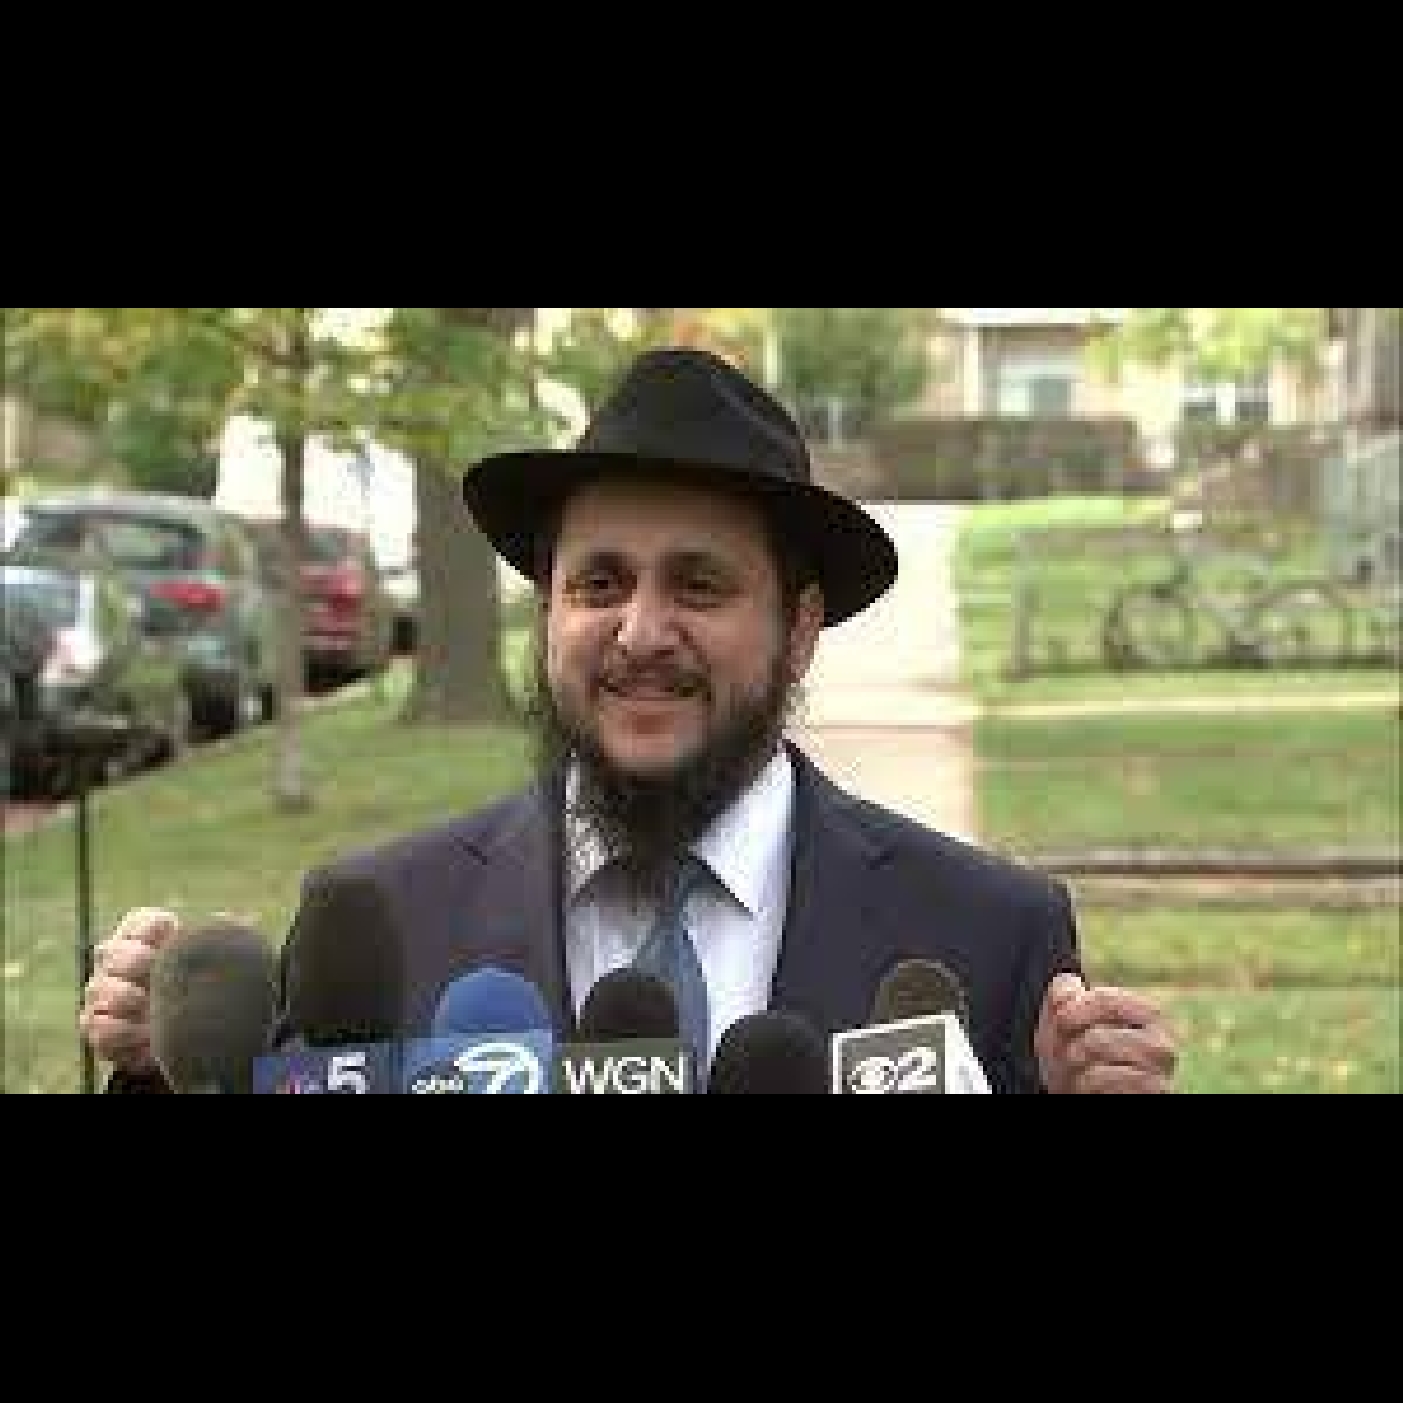 R’ Meir Hecht – Update on Raanan Family, Words of Inspiration and Hope